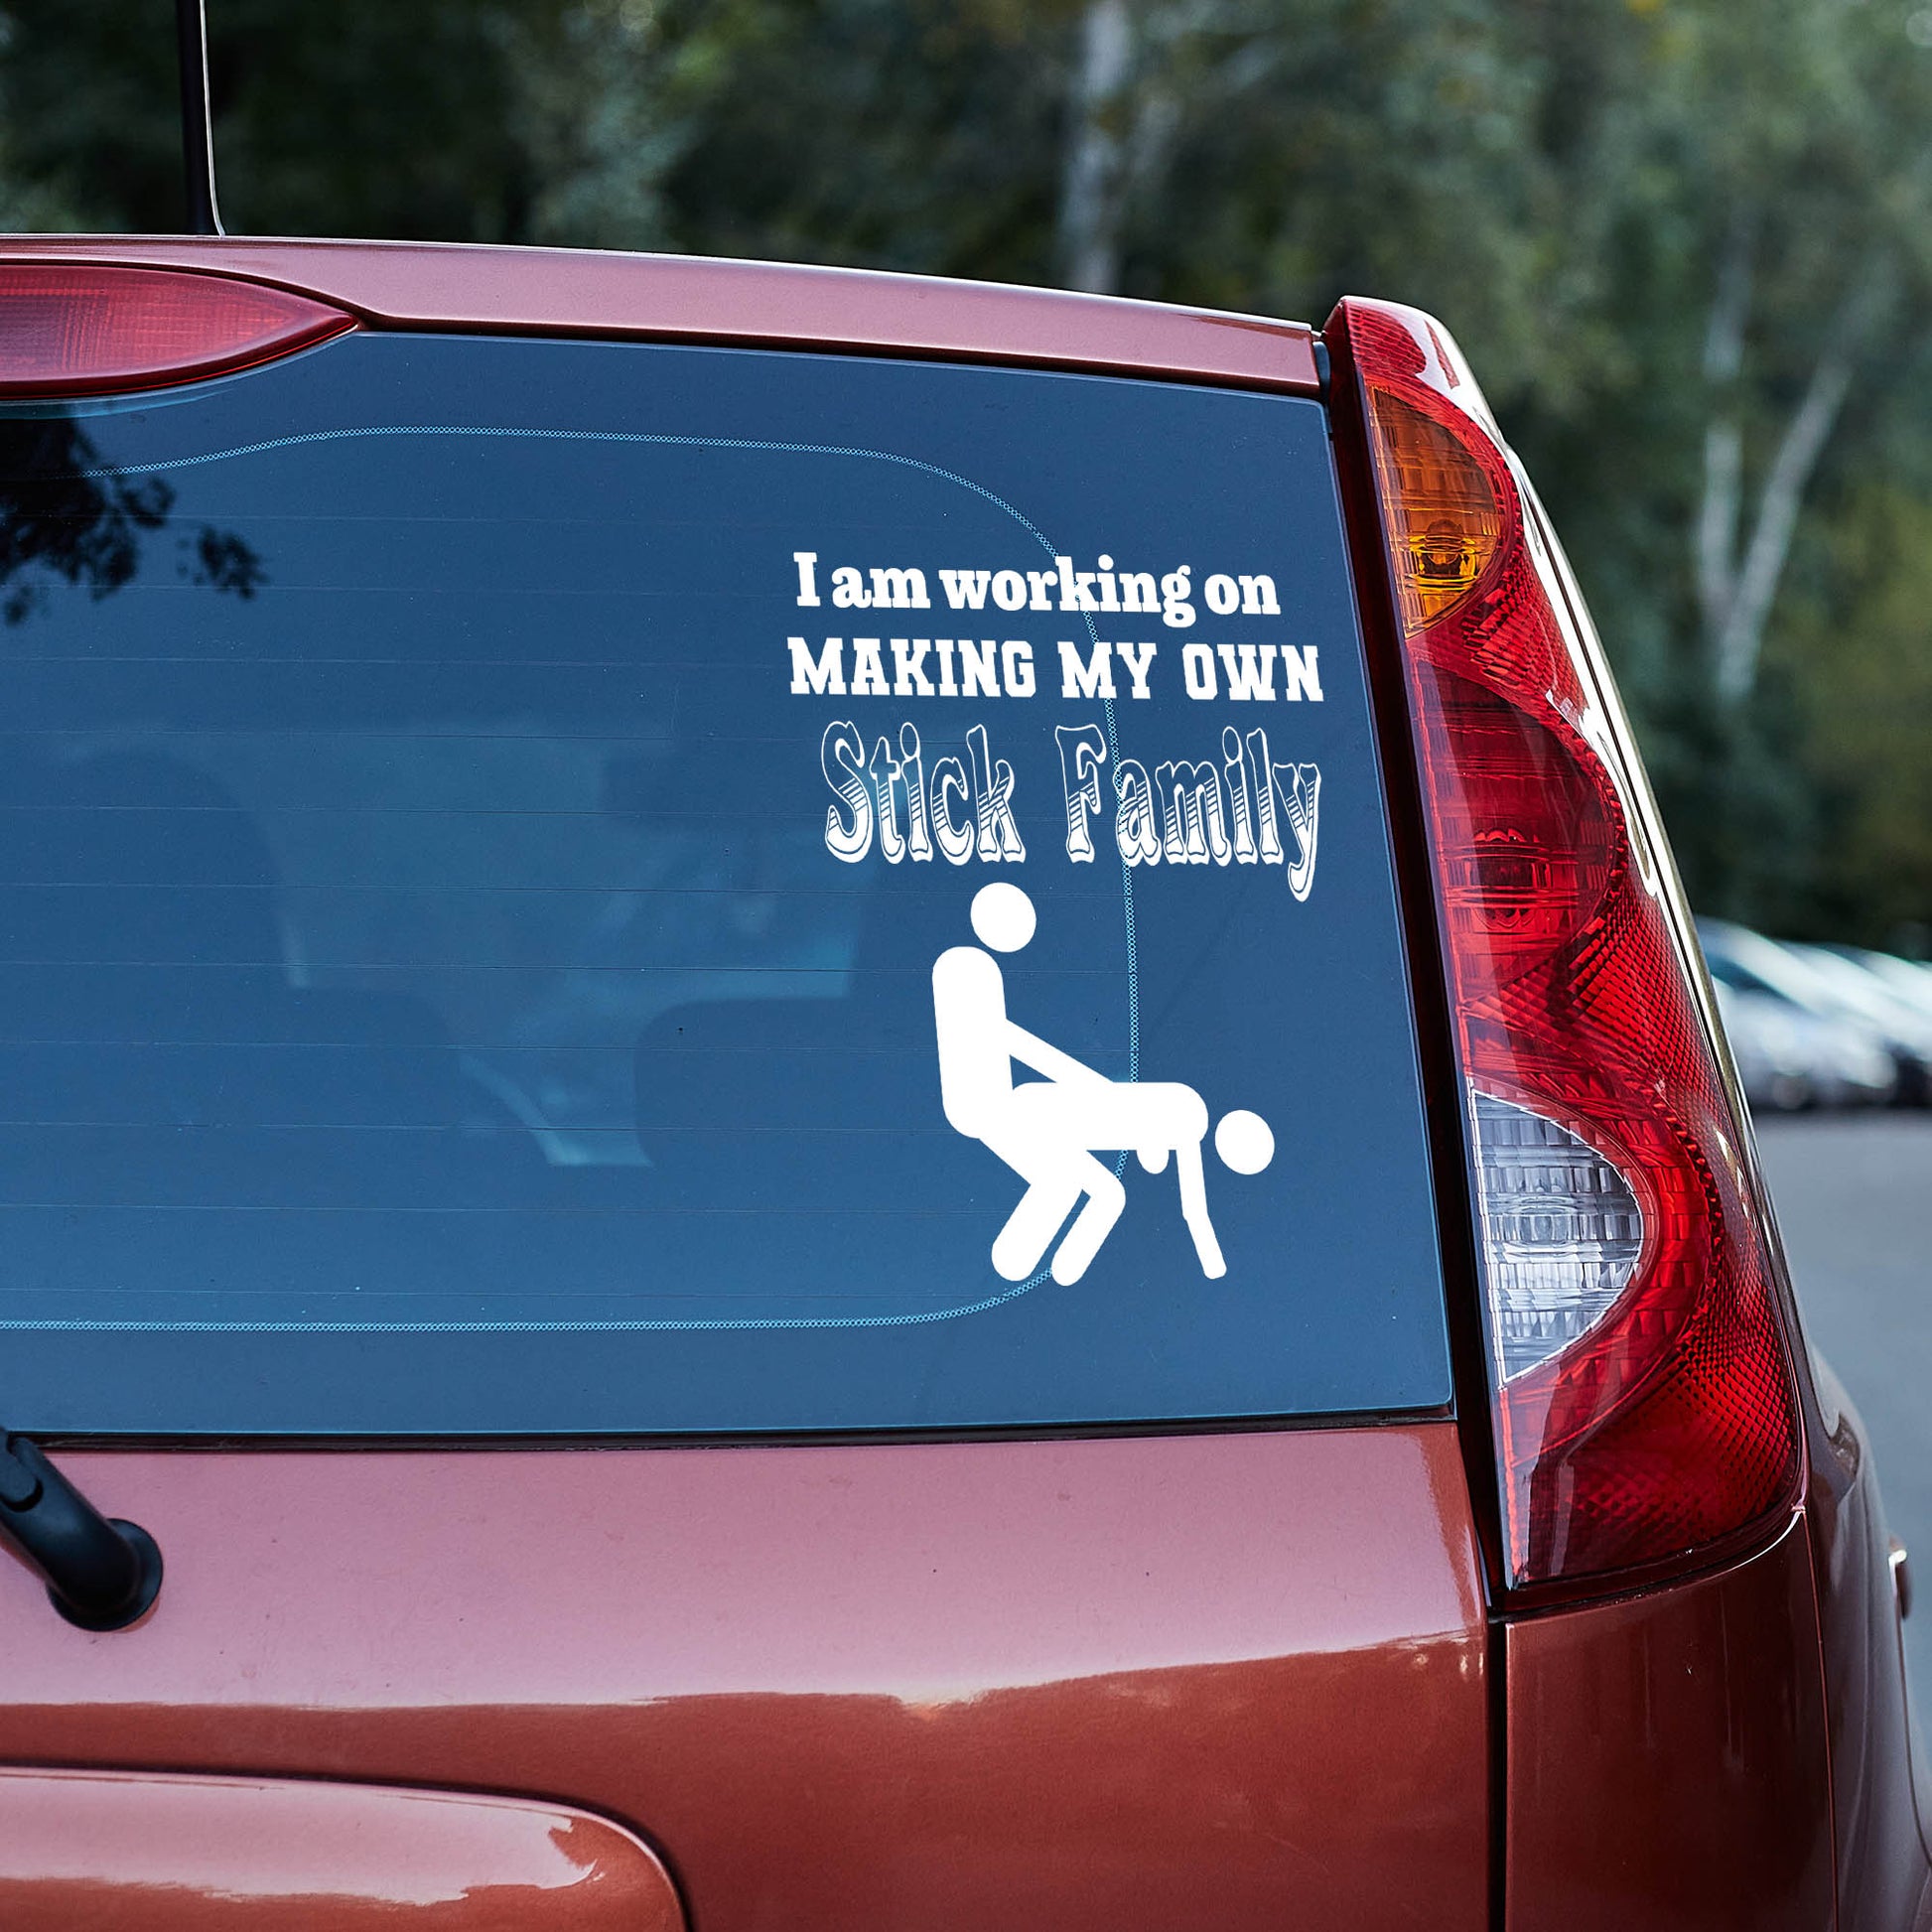 I am working on making my own stick family Vinyl Decal boss gift car decor dads day gift gift for dad gift for grandpa gift for her gift for him gift for husband gift for mom gift for sister gift for wife moms gift Unique gift Vinyl Vinyl decals vinyl sticker Vinyl stickers window decal window sticker